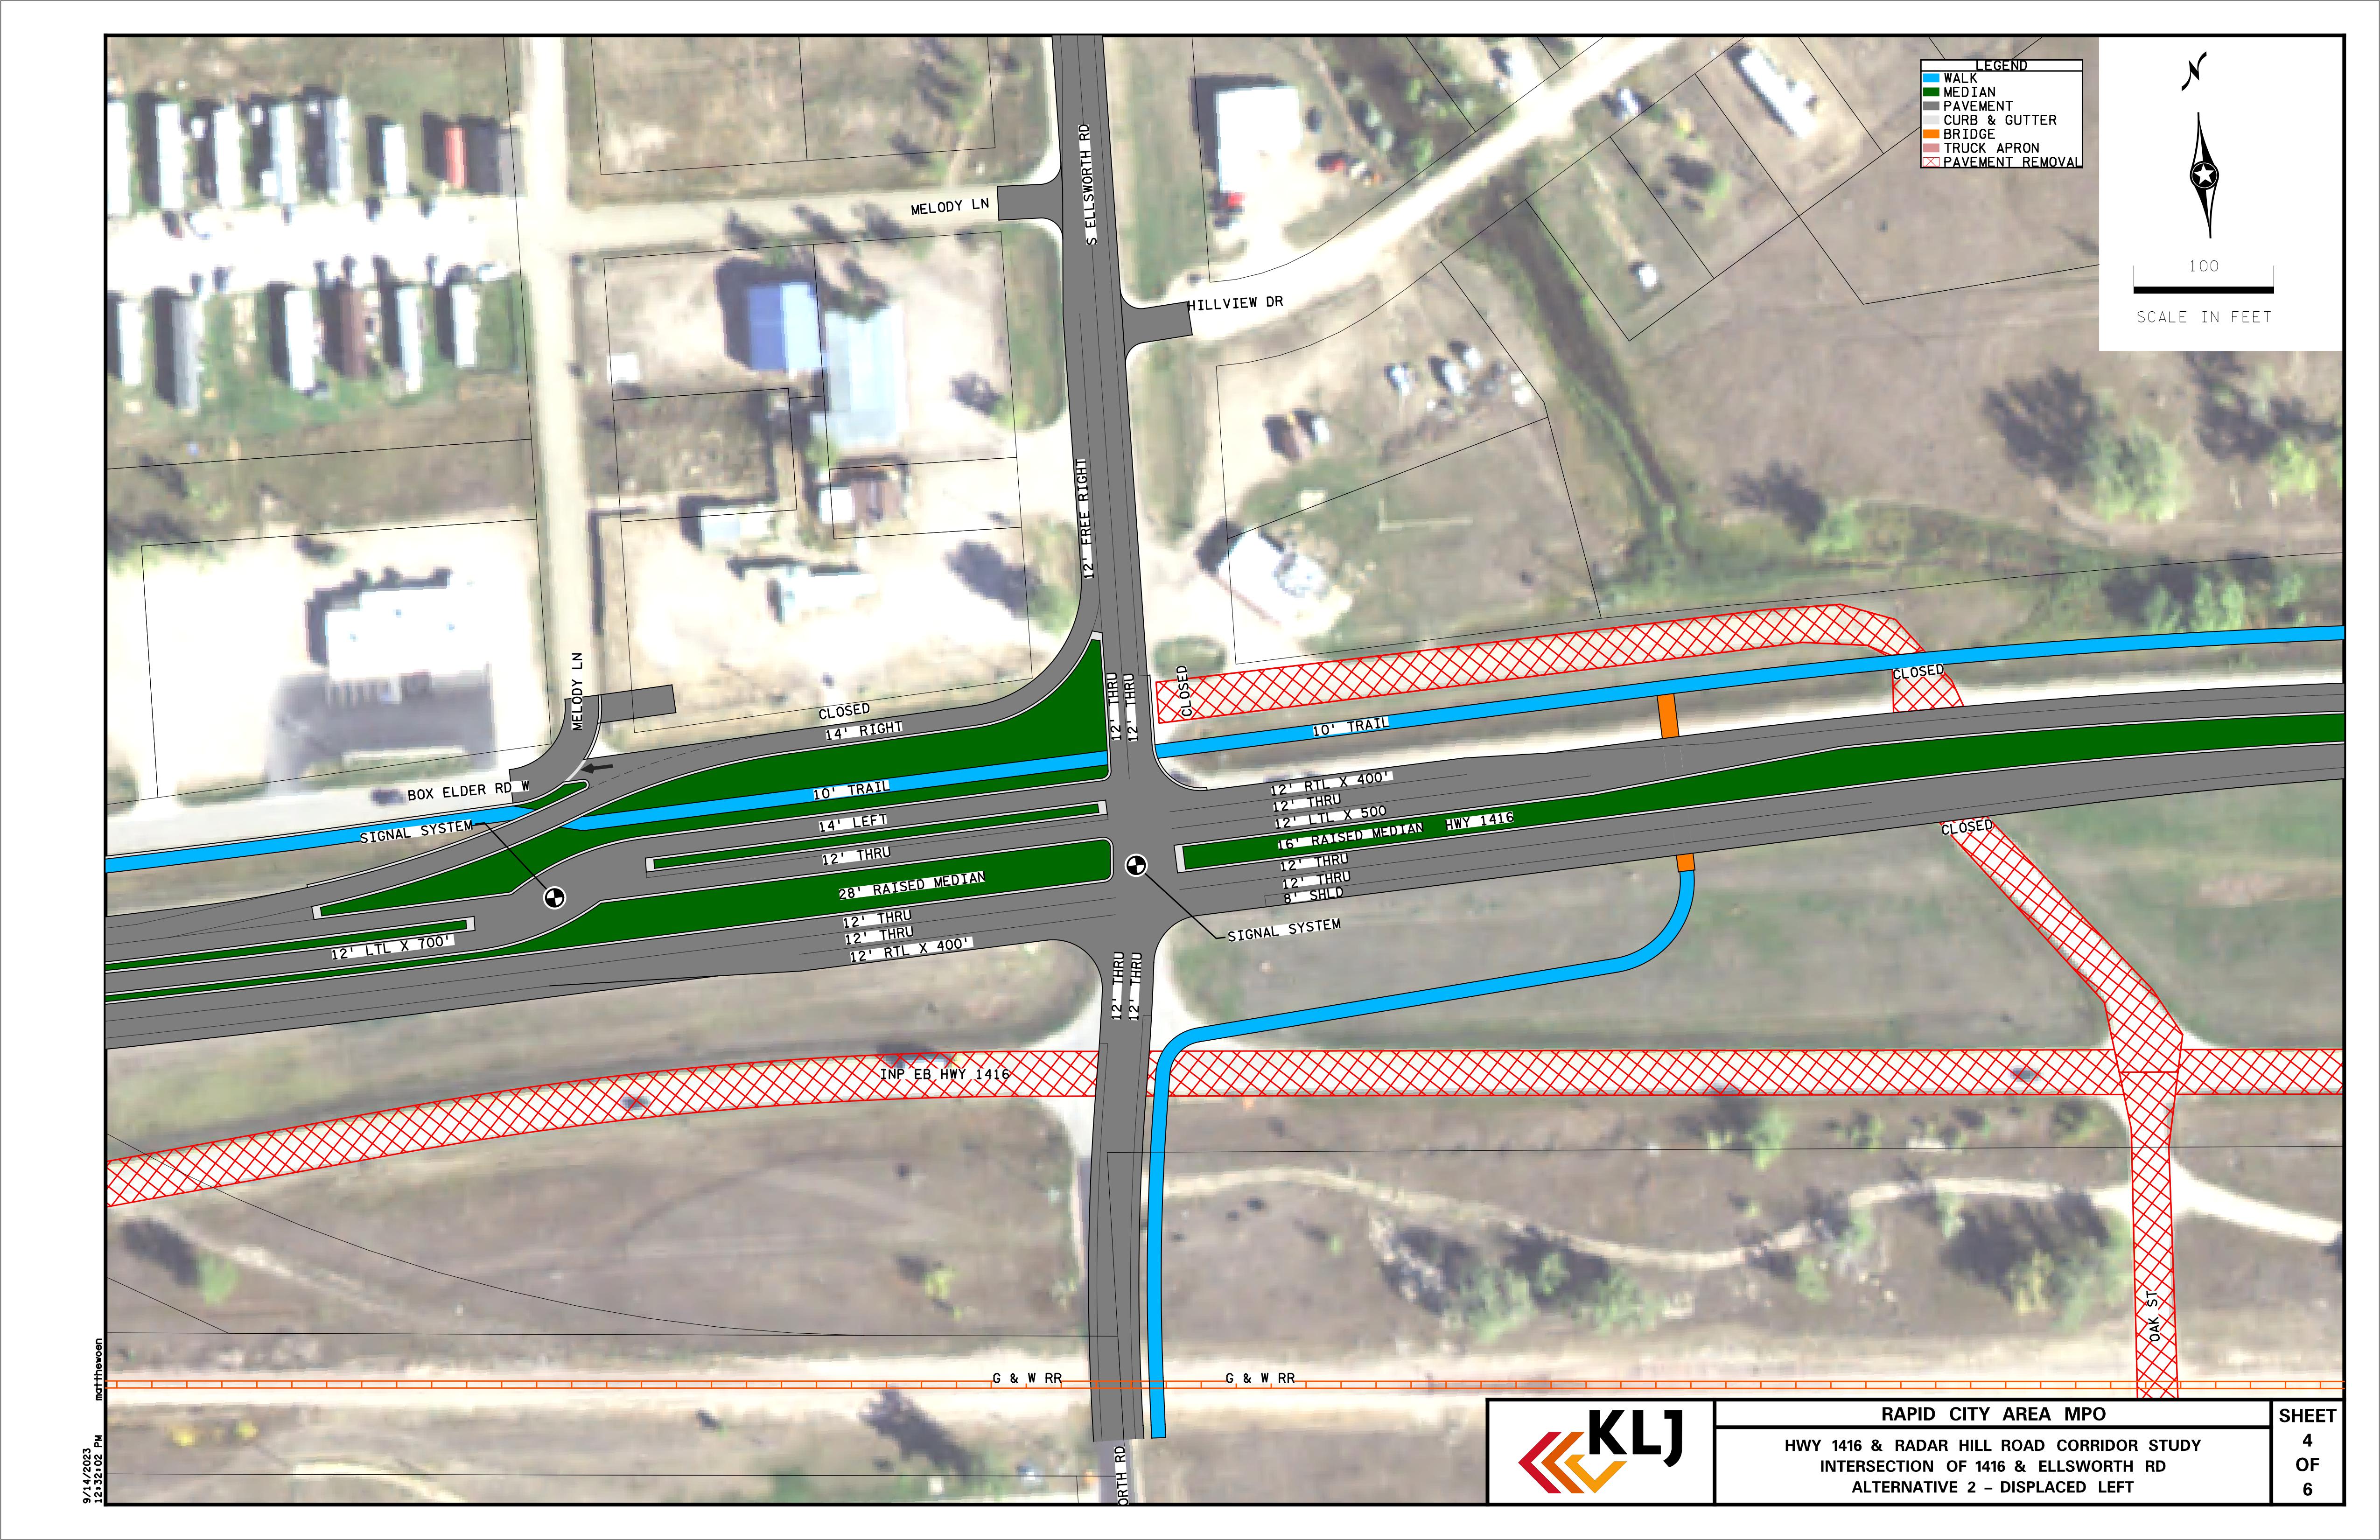 Major Highway 14/16 intersections to undergo safety renovations